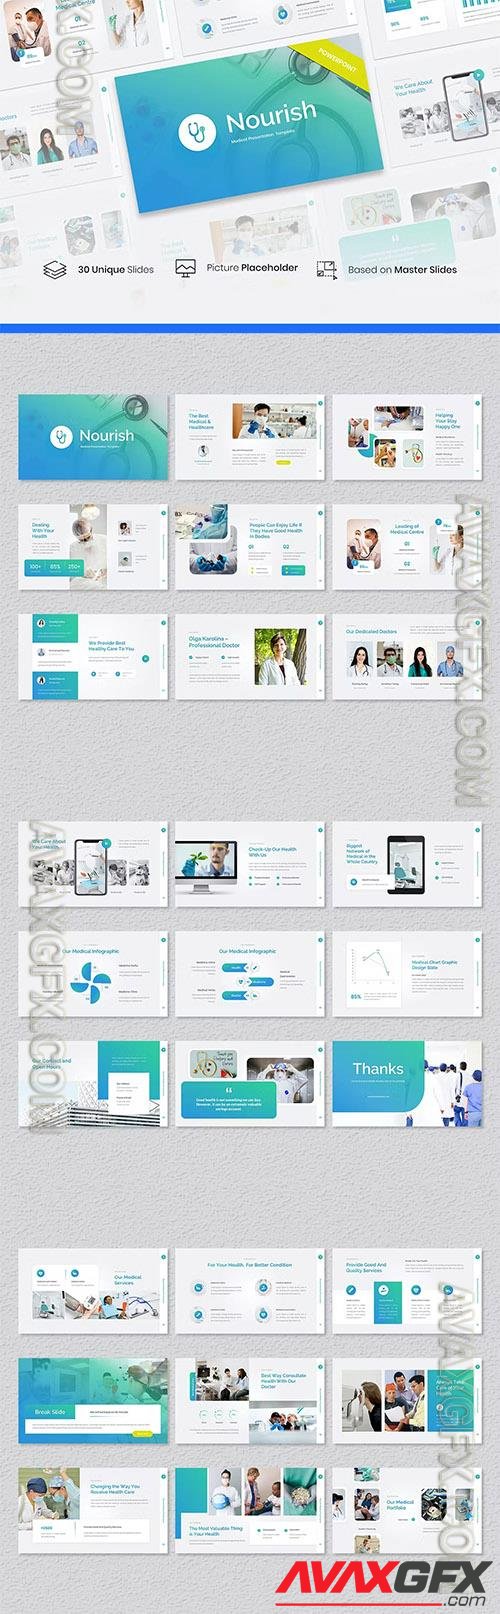 Nourish – Medical PowerPoint Template ZXYNMAD